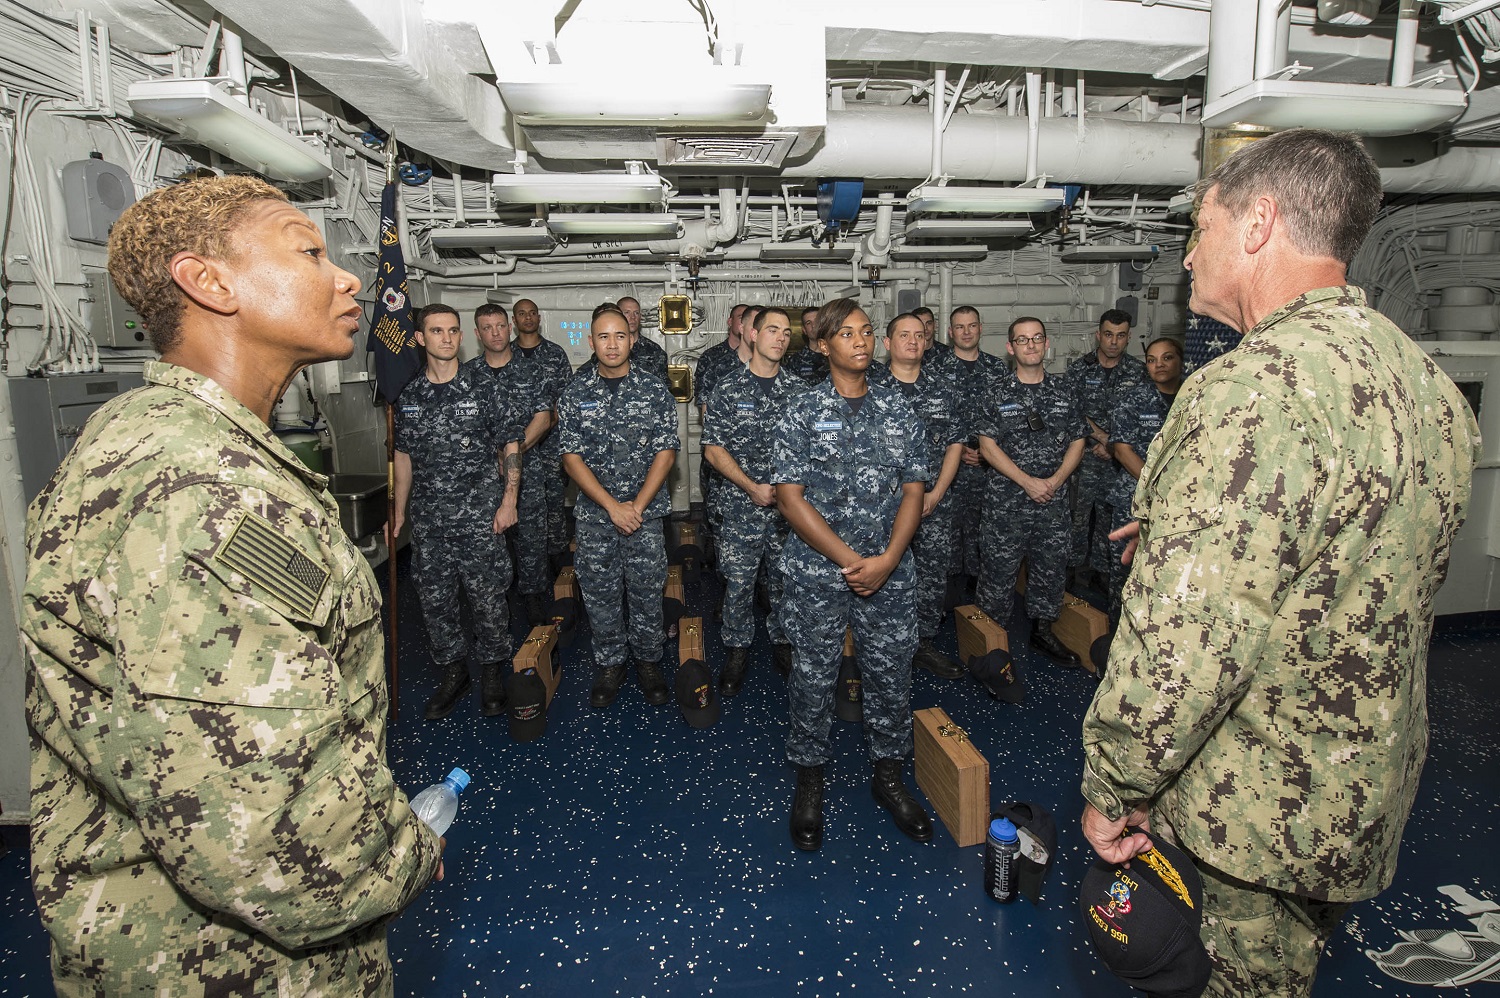 MANAMA, Bahrain (Sept. 9, 2015) Fleet Master Chief April Beldo, left, and Vice Adm. Bill Moran, Chief of Naval Personnel, speak to chief petty officer selectees onboard Wasp-class amphibious assault ship USS Essex (LHD 2) during an in port visit. Essex is the flagship of the Essex Amphibious Ready Group (ARG) and, with the embarked 15th Marine Expeditionary Unit (MEU), is deployed in support of maritime security operations and theater security cooperation efforts in the U.S. 5th Fleet area of operations. U.S. Navy photo by Mass Communication Specialist 2nd Class Huey D. Younger Jr.